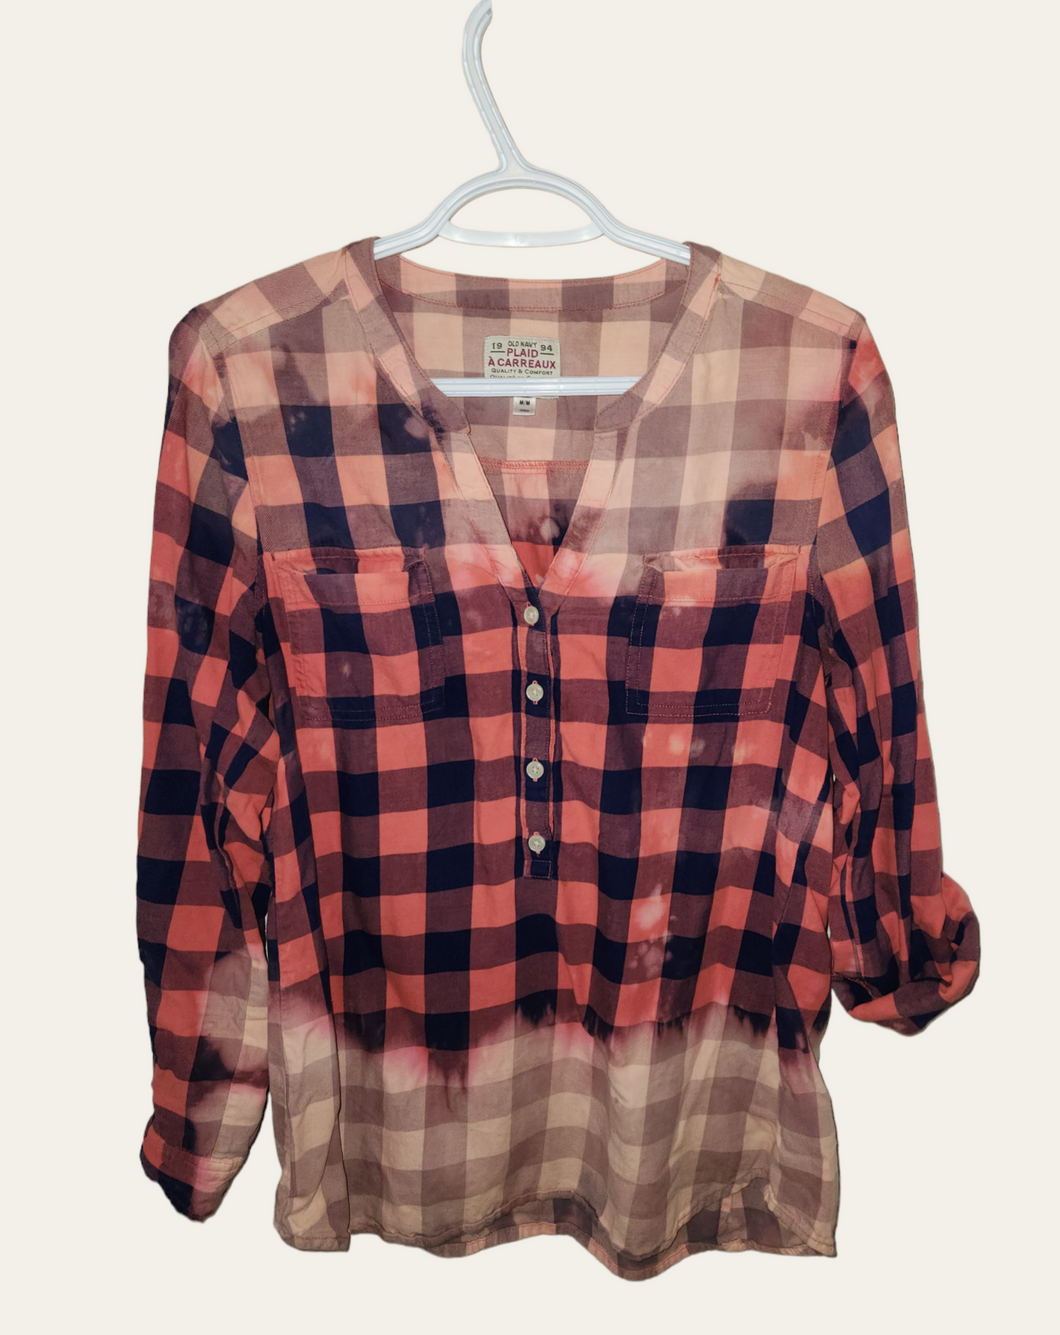 Distressed Flannel - Navy/Coral Plaid - Women's Size Medium